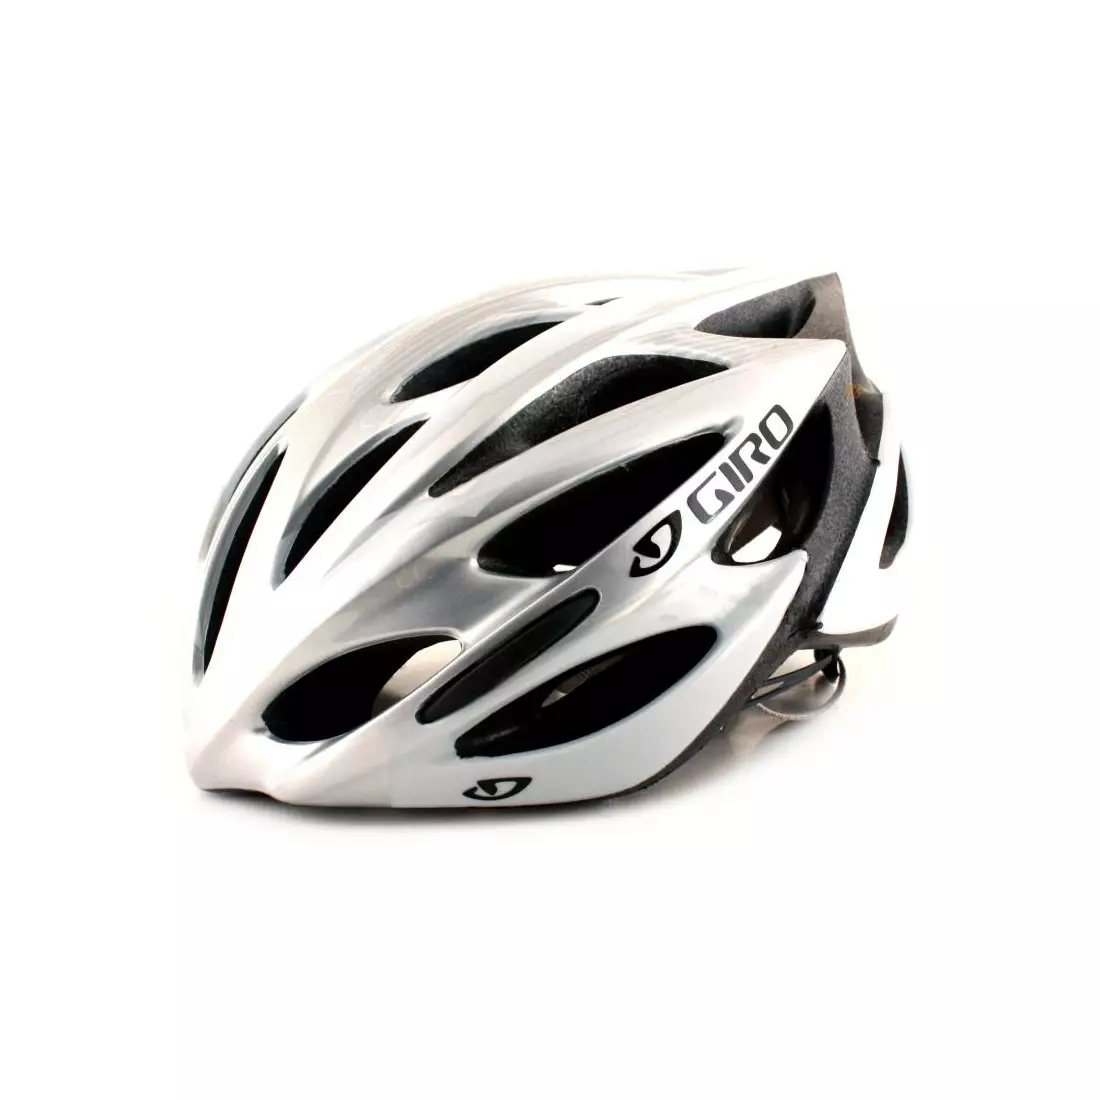 GIRO bicycle helmet MONZA white and silver